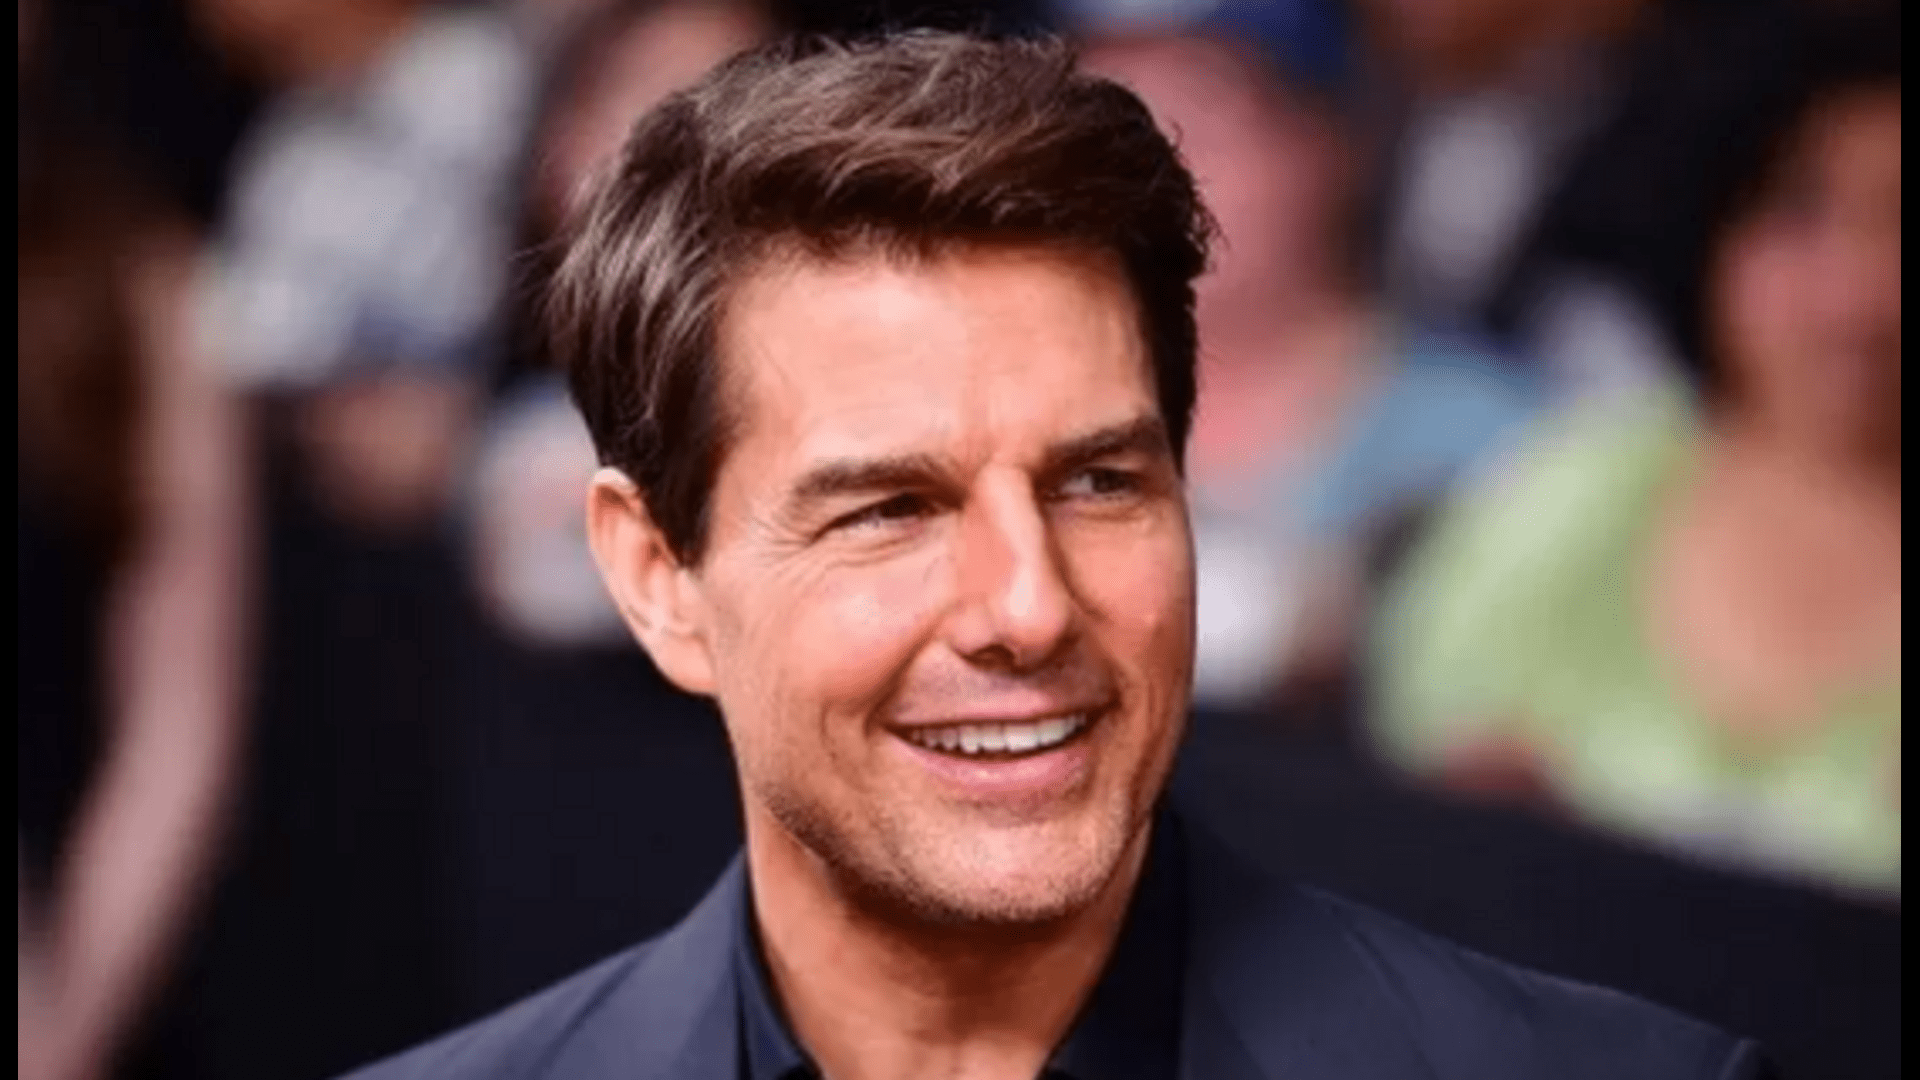 ”tom-cruise-will-be-back-before-he-can-leave-filming-has-begun-on-the-eighth-installment-of-the-mission-impossible-franchise”